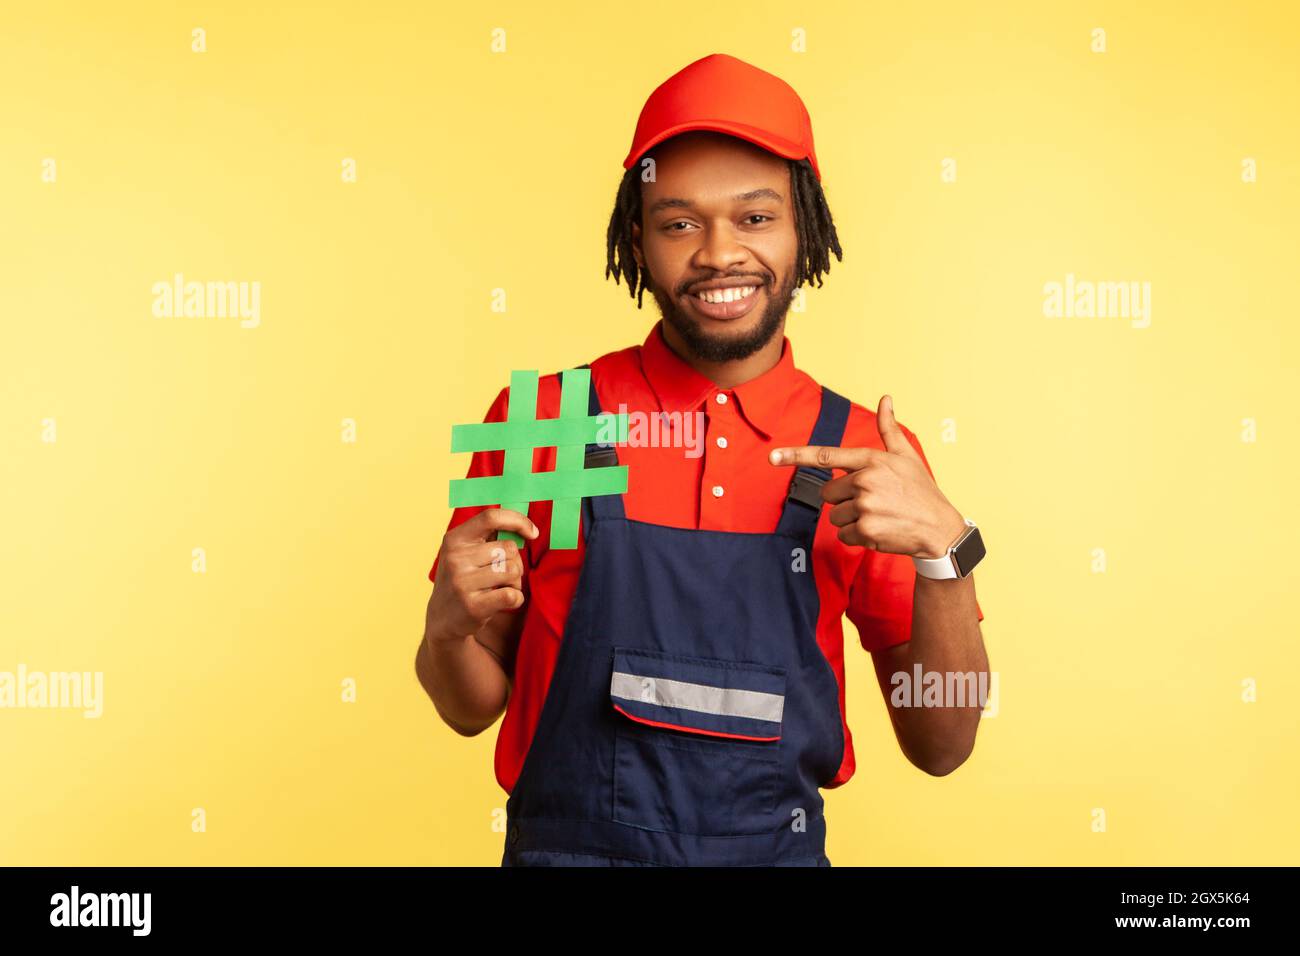 Portrait of happy workman wearing blue overalls standing, holding green hashtag and pointing finger to it, looking at camera with smile. Indoor studio shot isolated on yellow background. Stock Photo